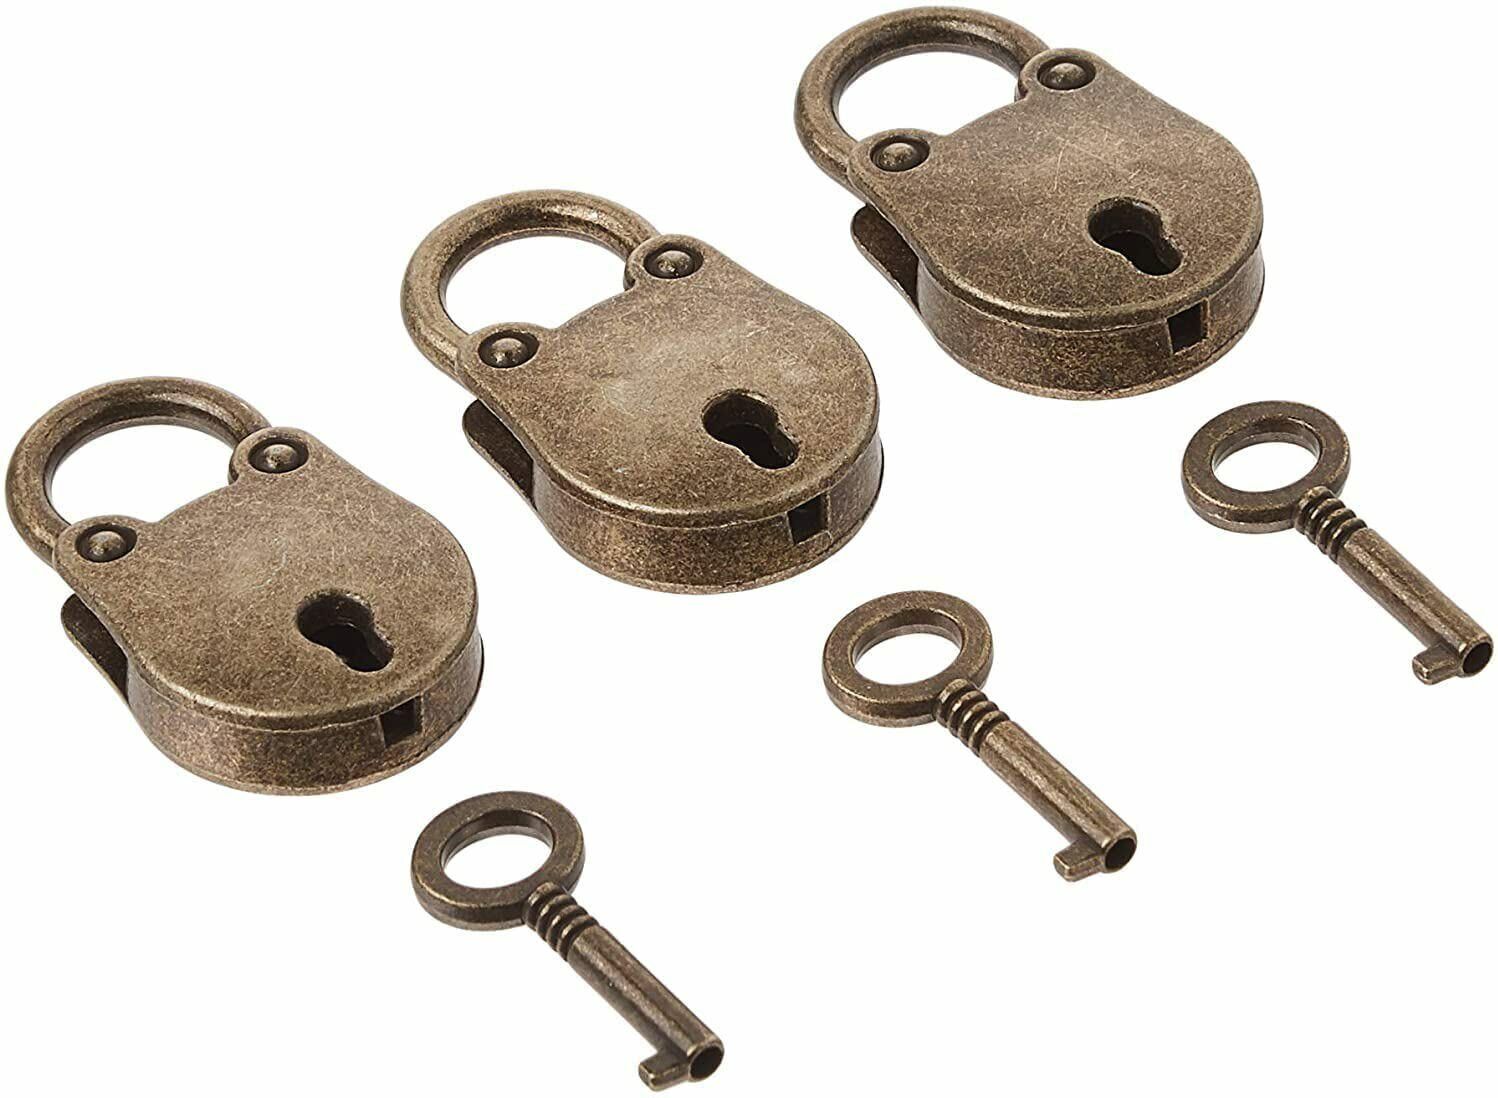 Old Vintage Antique Style Mini Sales of SALE items from new works Archaize Padlocks with K Lock Key Free shipping anywhere in the nation